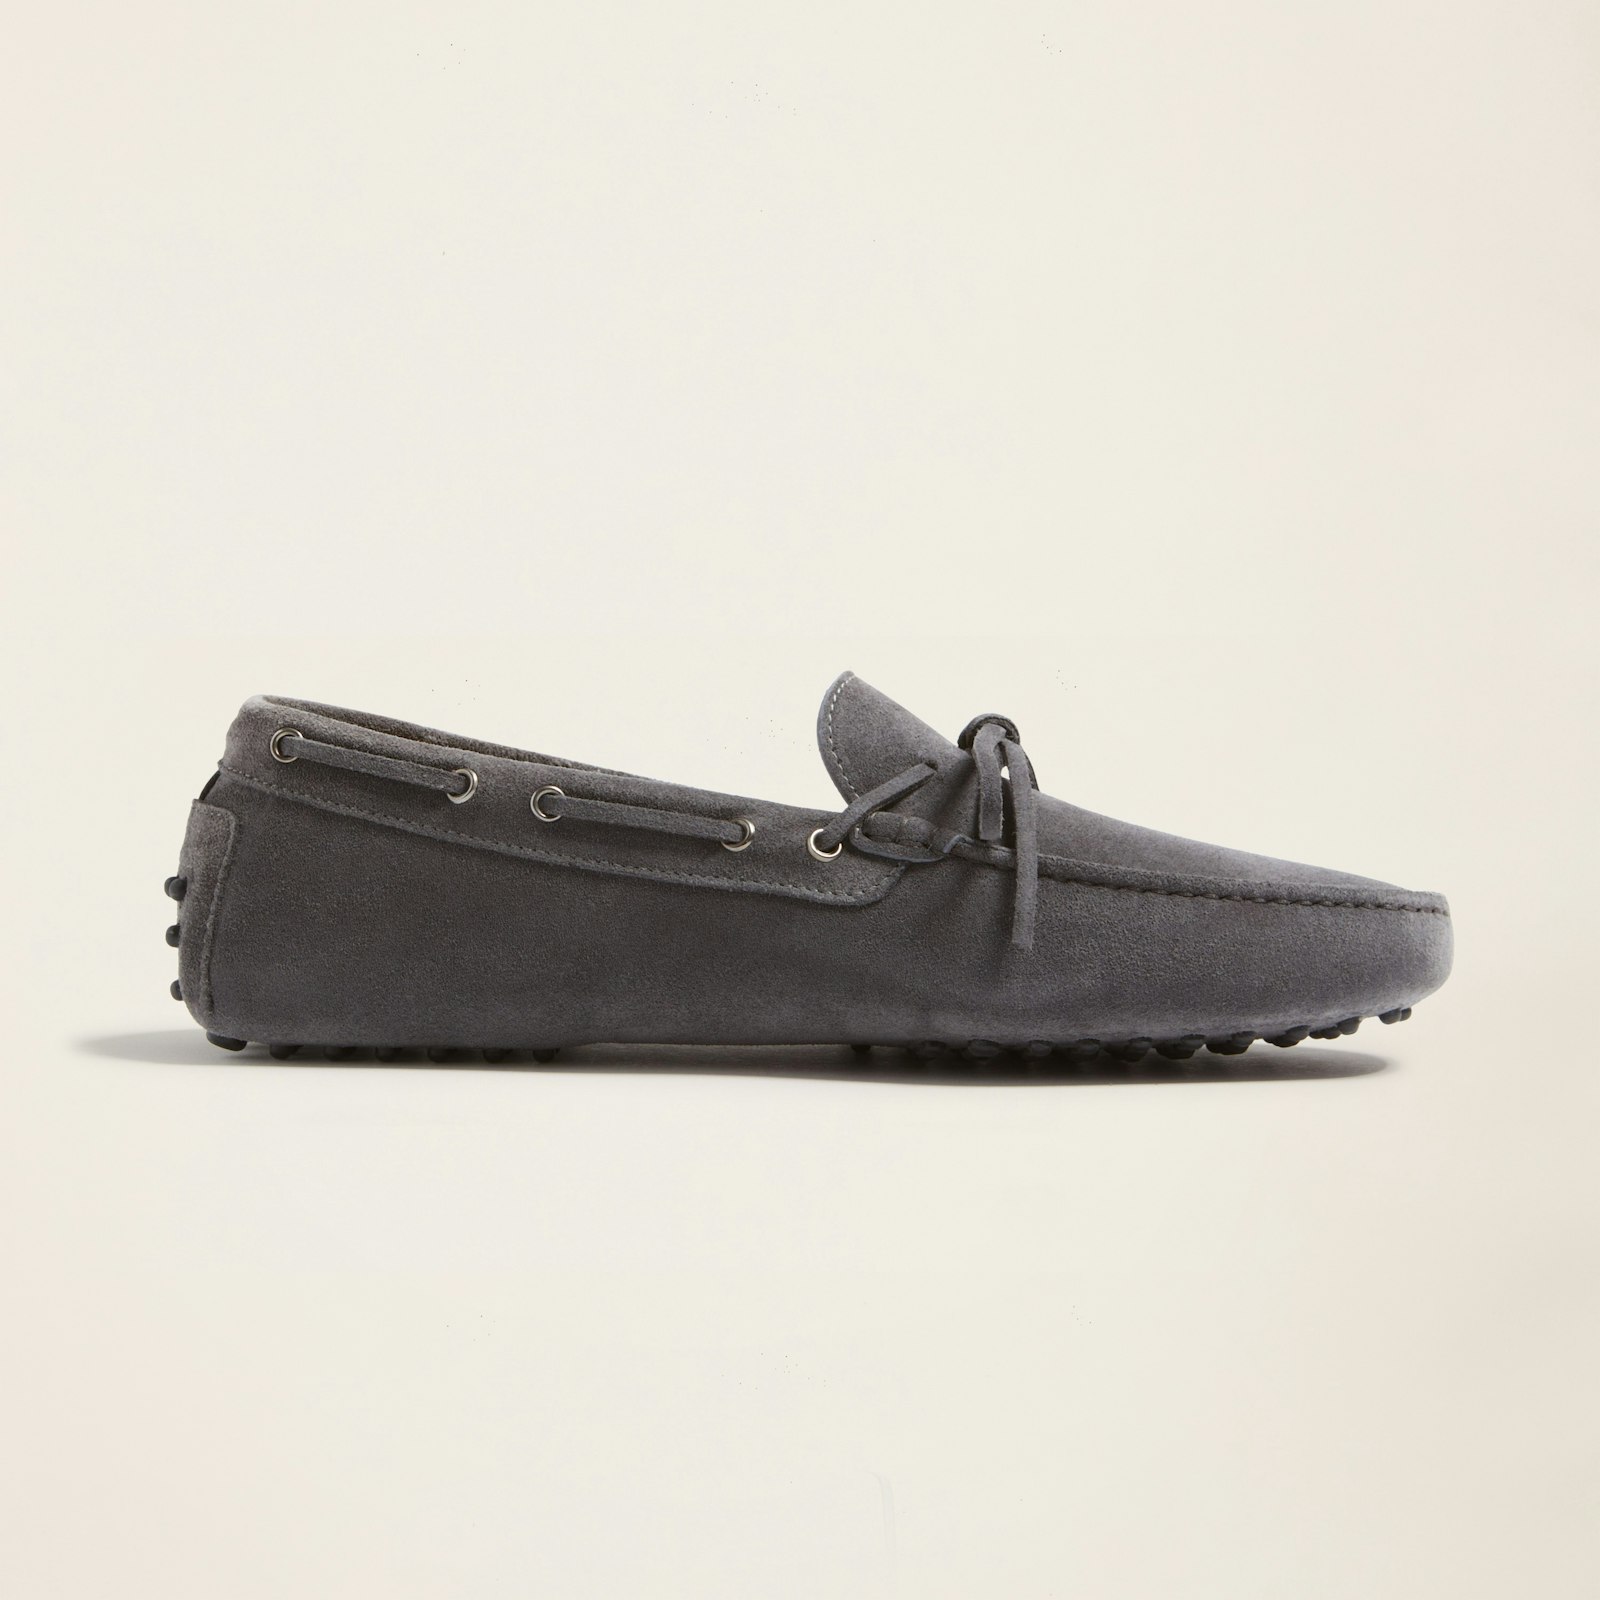 Lucca_LaceUp_DrivingShoe_Anthracite_1x1_RIGHT_0339.jpg